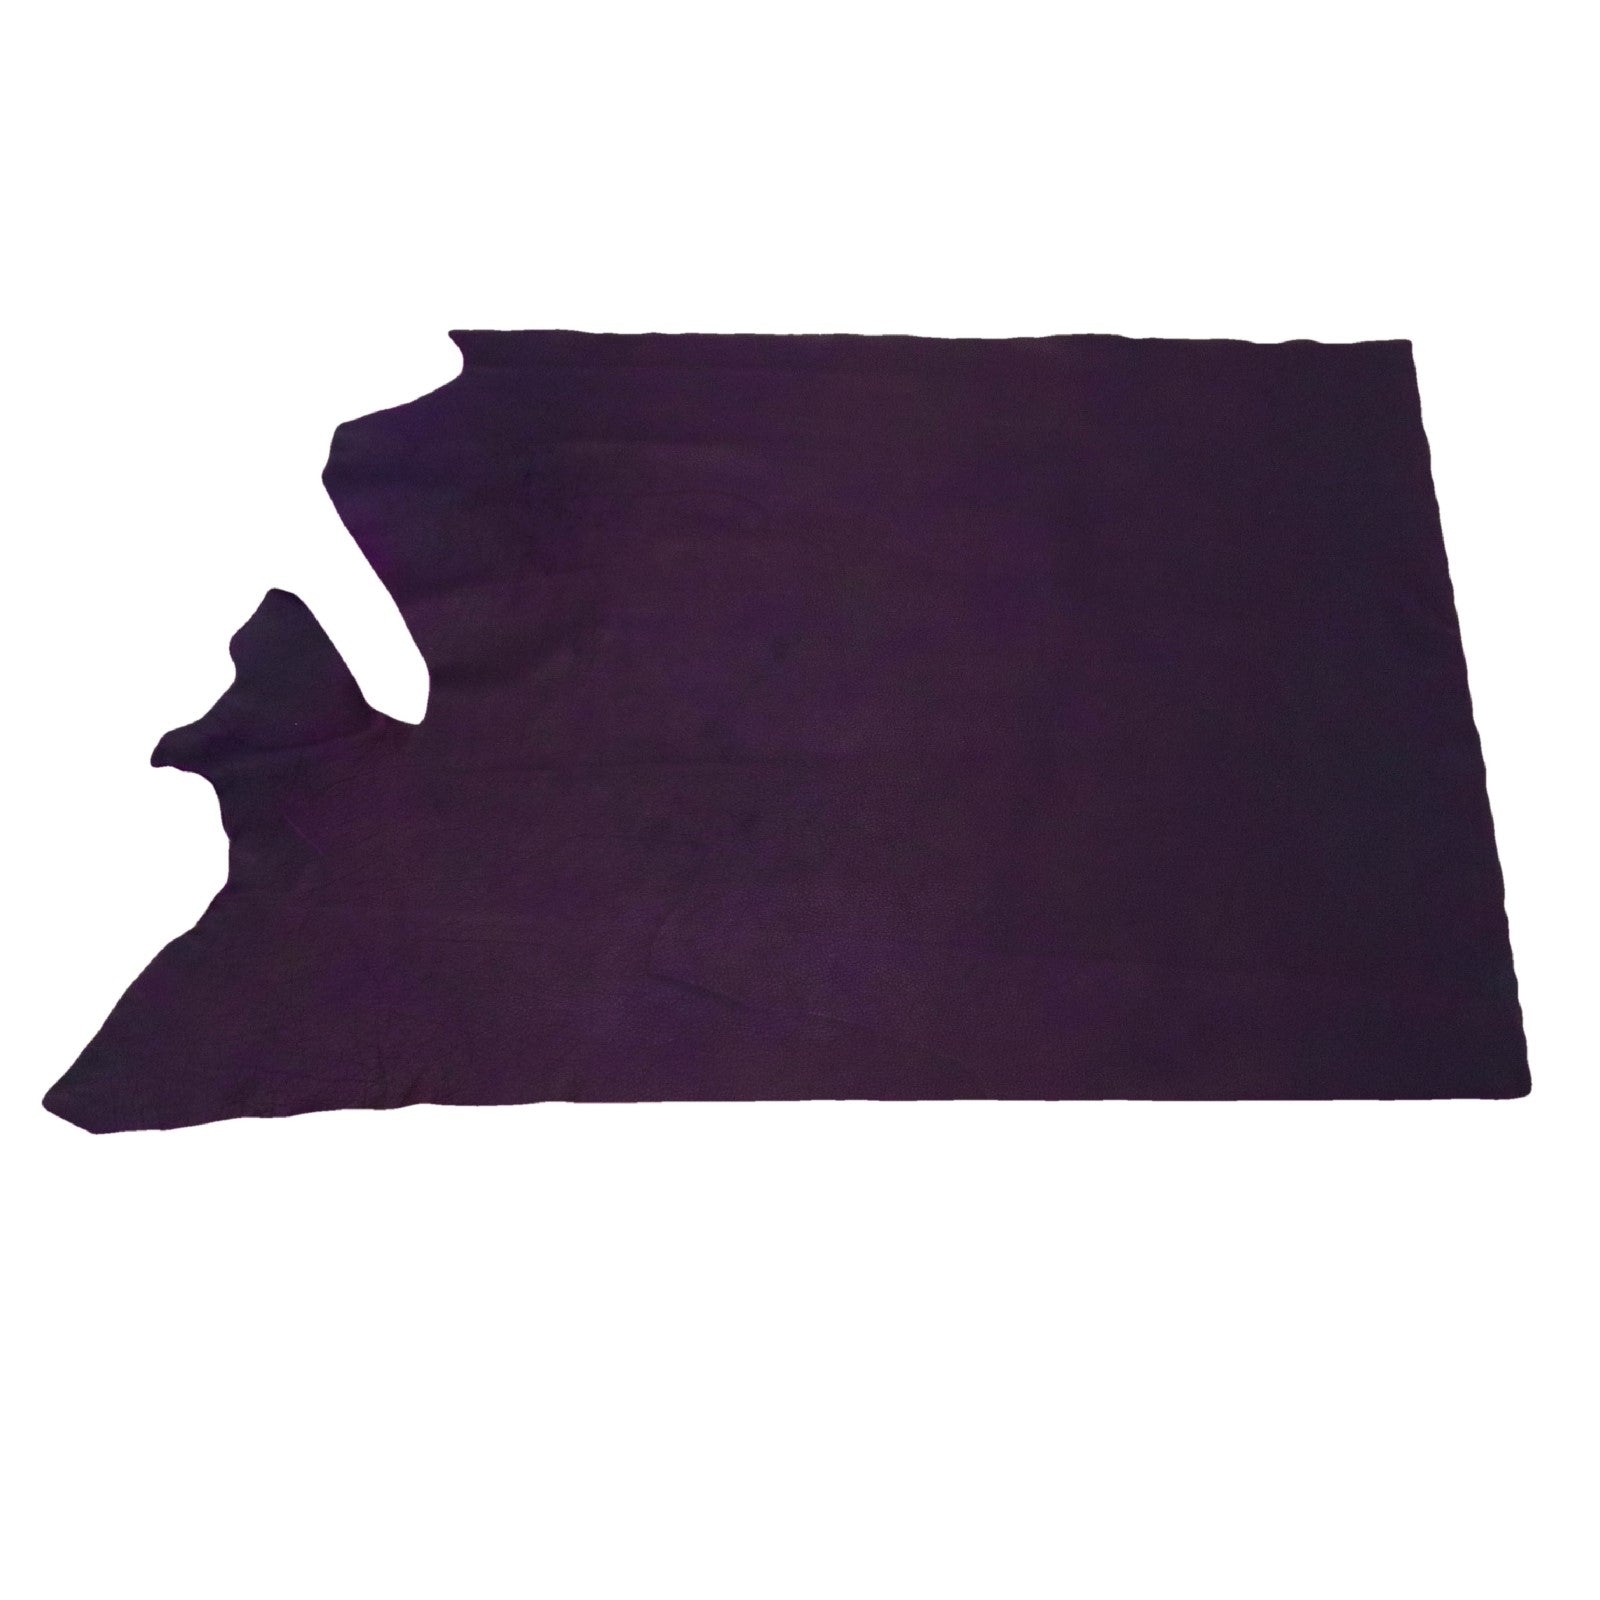 Purple Mount Majesty, Chap Cow Sides, Highland Ridge, Middle Piece / 6.5-7.5 | The Leather Guy